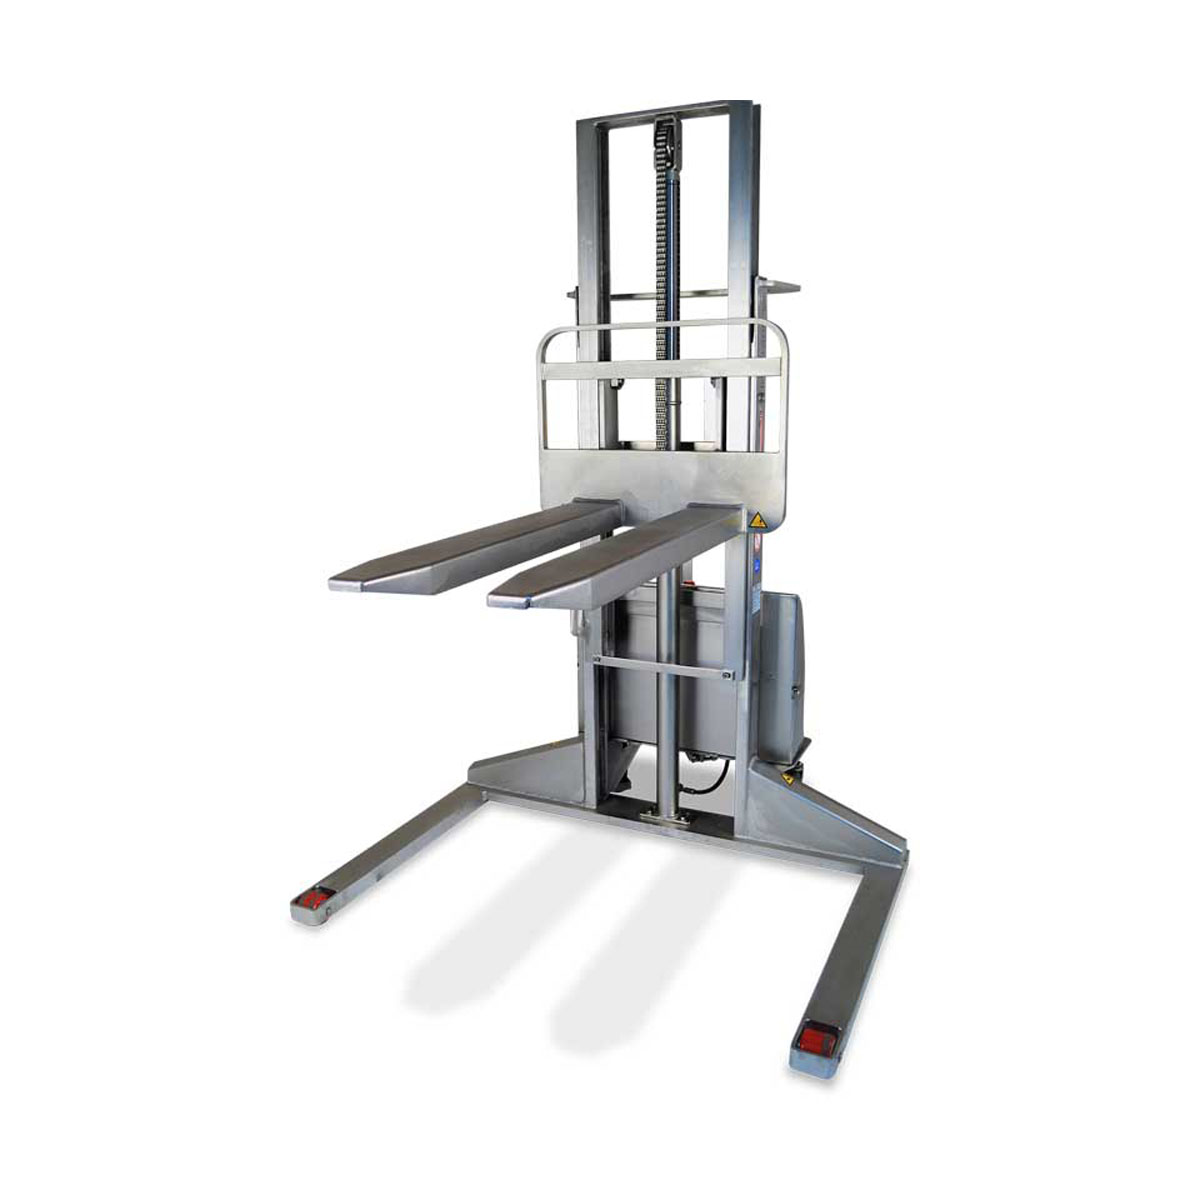 Buy Semi-electric Straddle Stacker in Pallet Stackers from Armanni available at Astrolift NZ